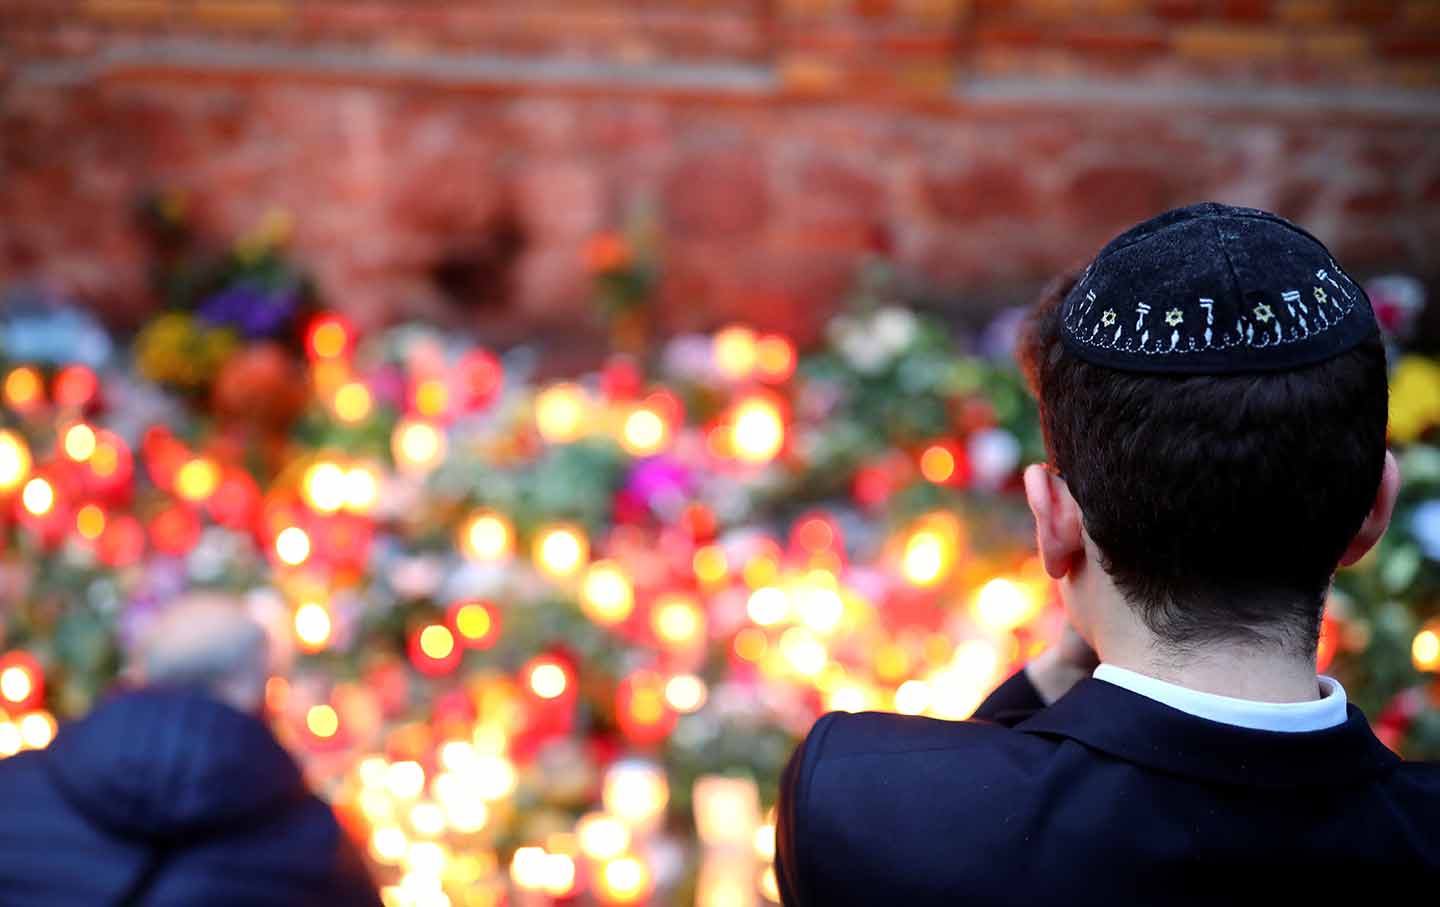 The Halle Synagogue Attack Is an Ominous Sign of the German Far Right’s Growing Prominence